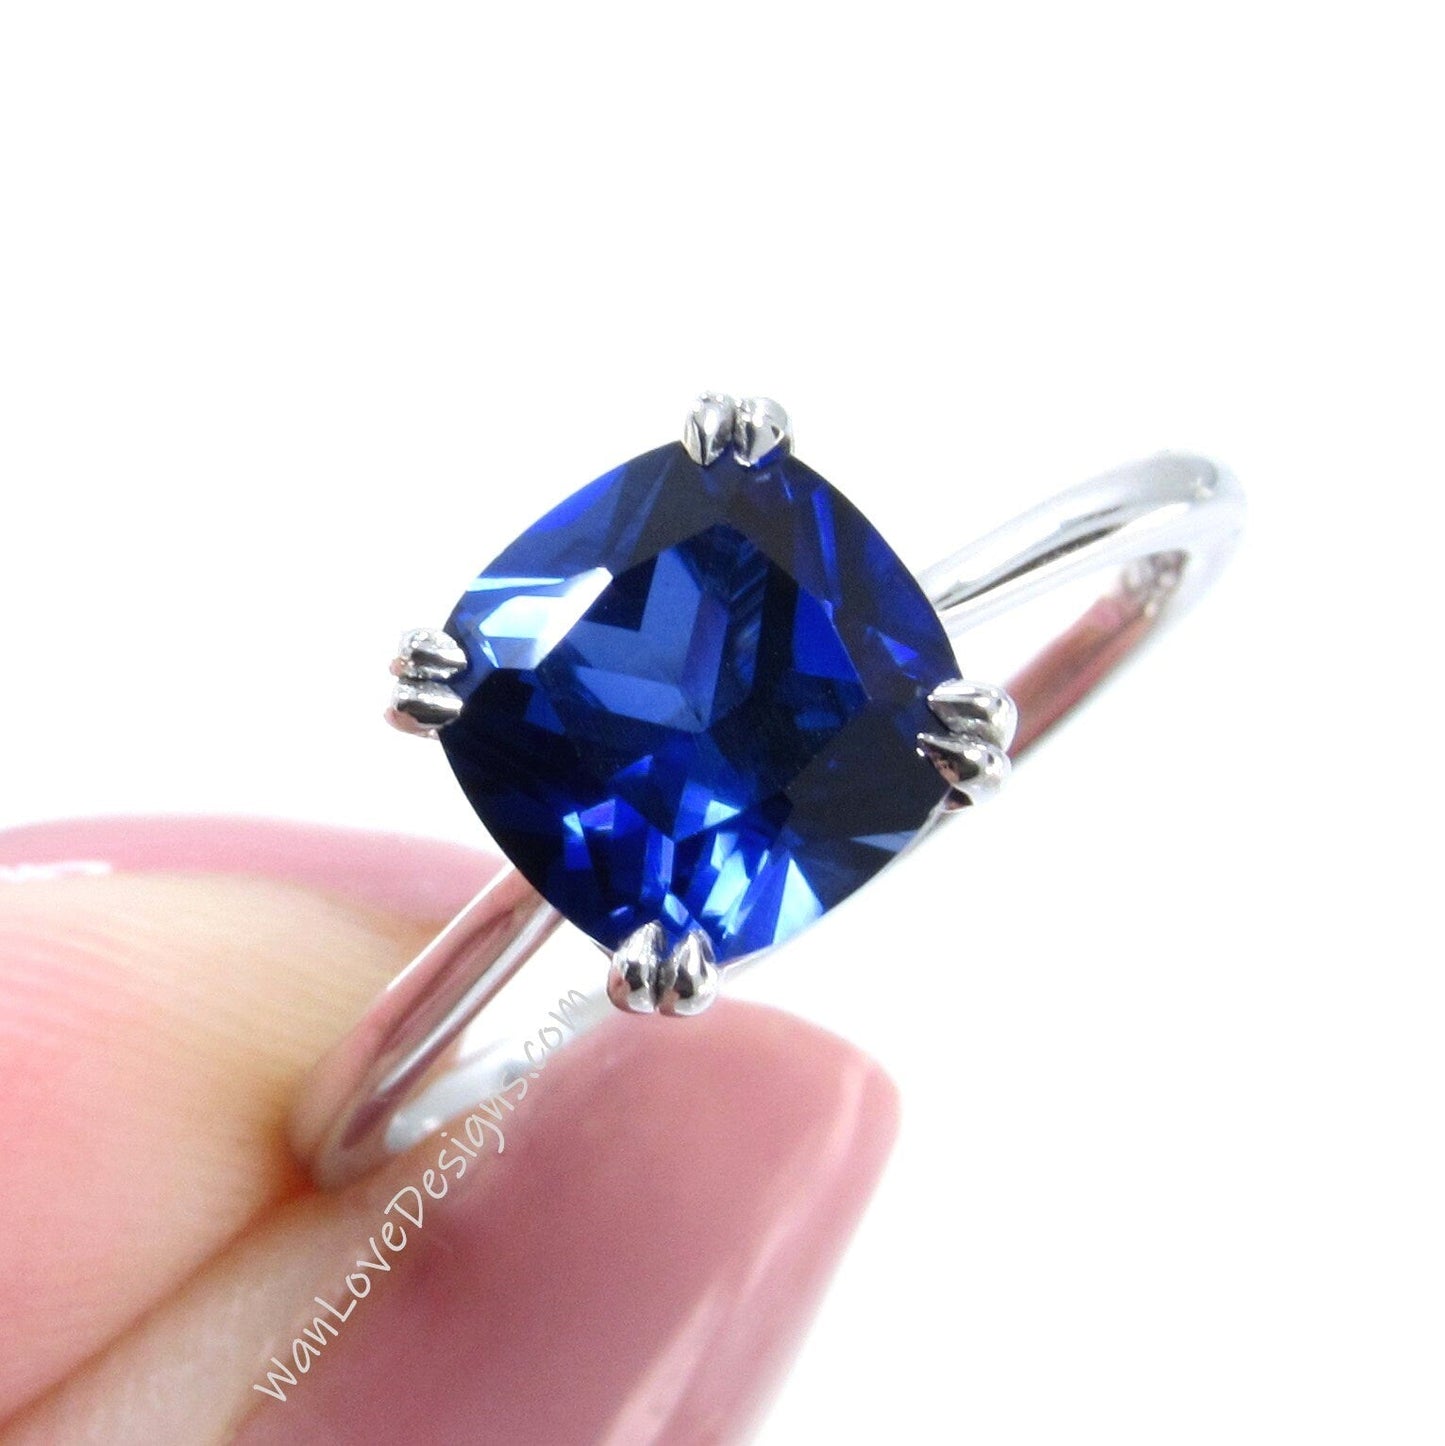 3ct Cushion cut Blue Sapphire engagement ring solitaire ring 4 prong art deco wedding solitaire ring Bridal ring Anniversary promise, Ready Wan Love Designs